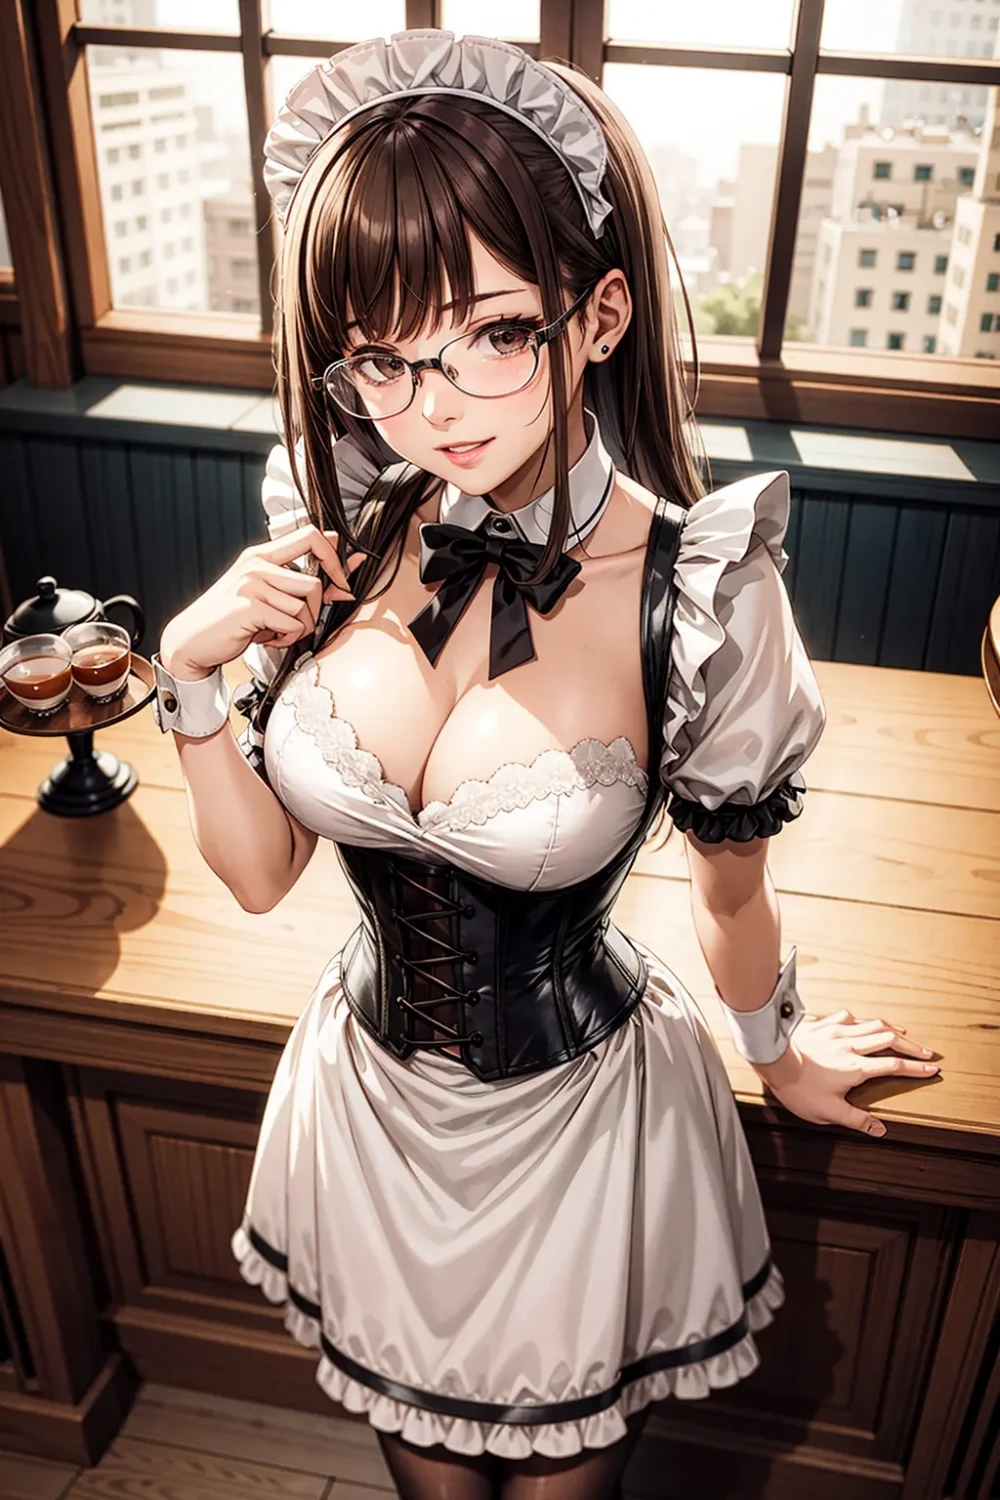 maid-anime-style-all-ages-39